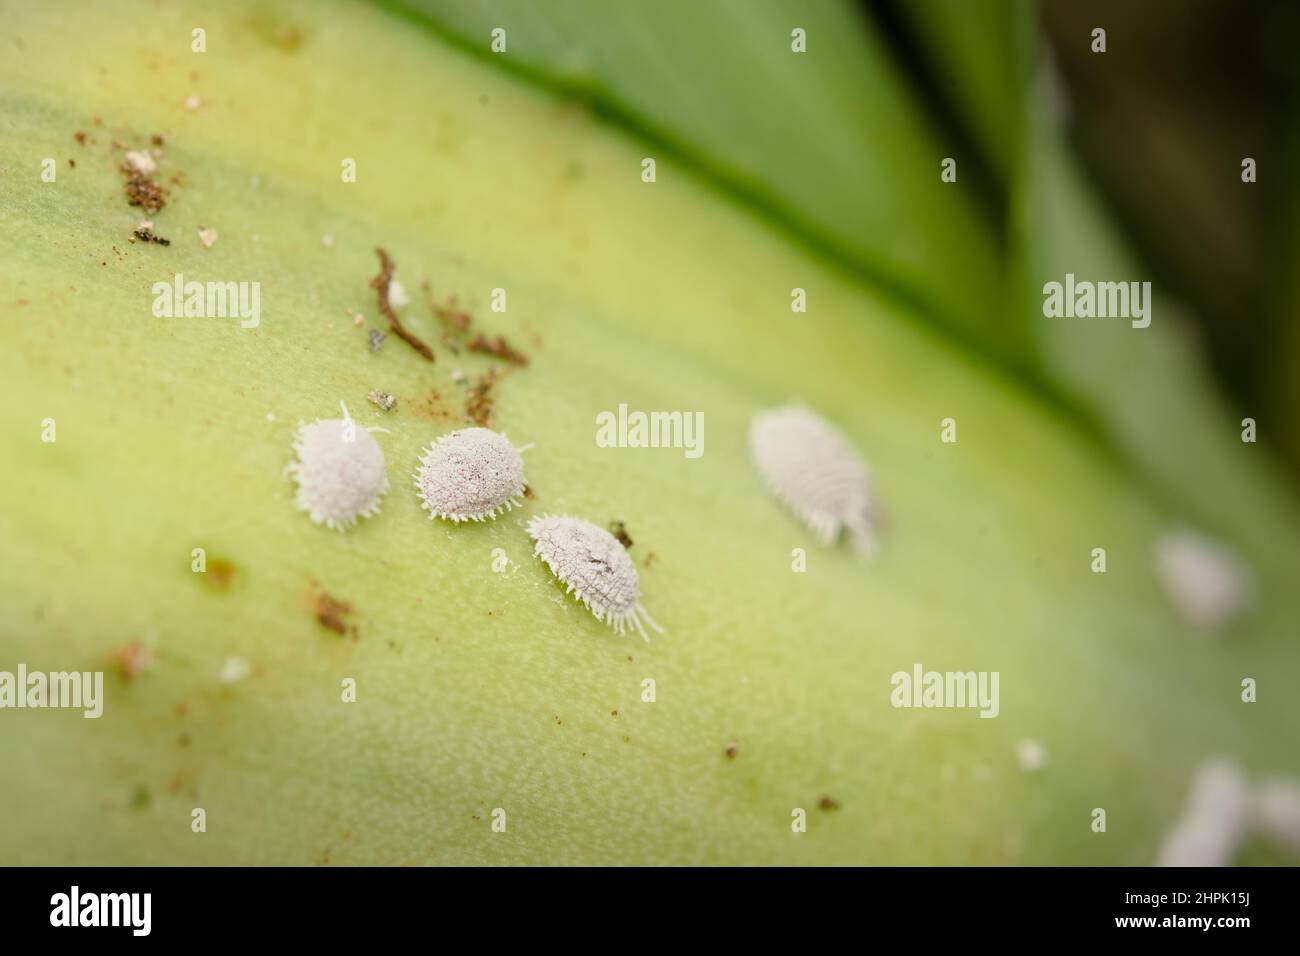 Mealy bugs are agricultural insect pest which on the plant leaf. Used selective focus. Stock Photo